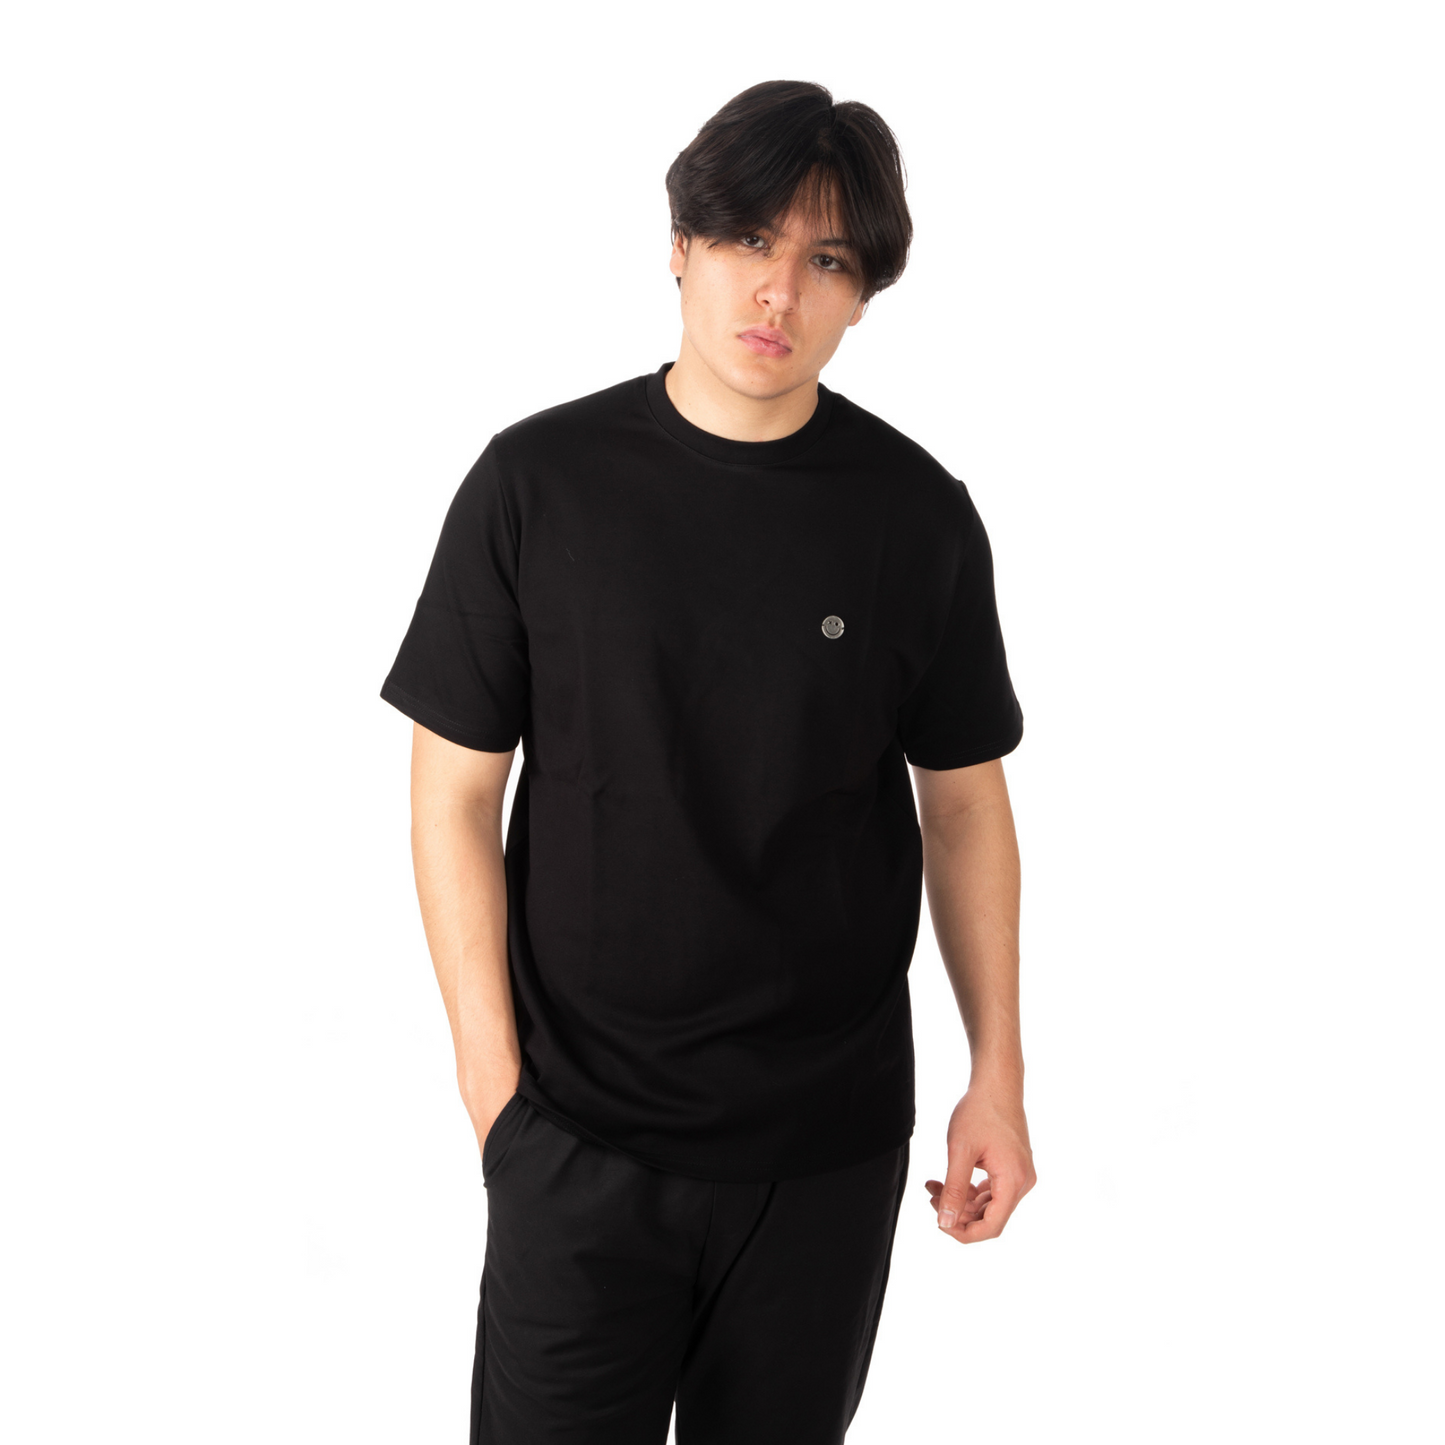 L’Homme Moderne Black T-shirt with Stainless Smiley zoomed view on male model